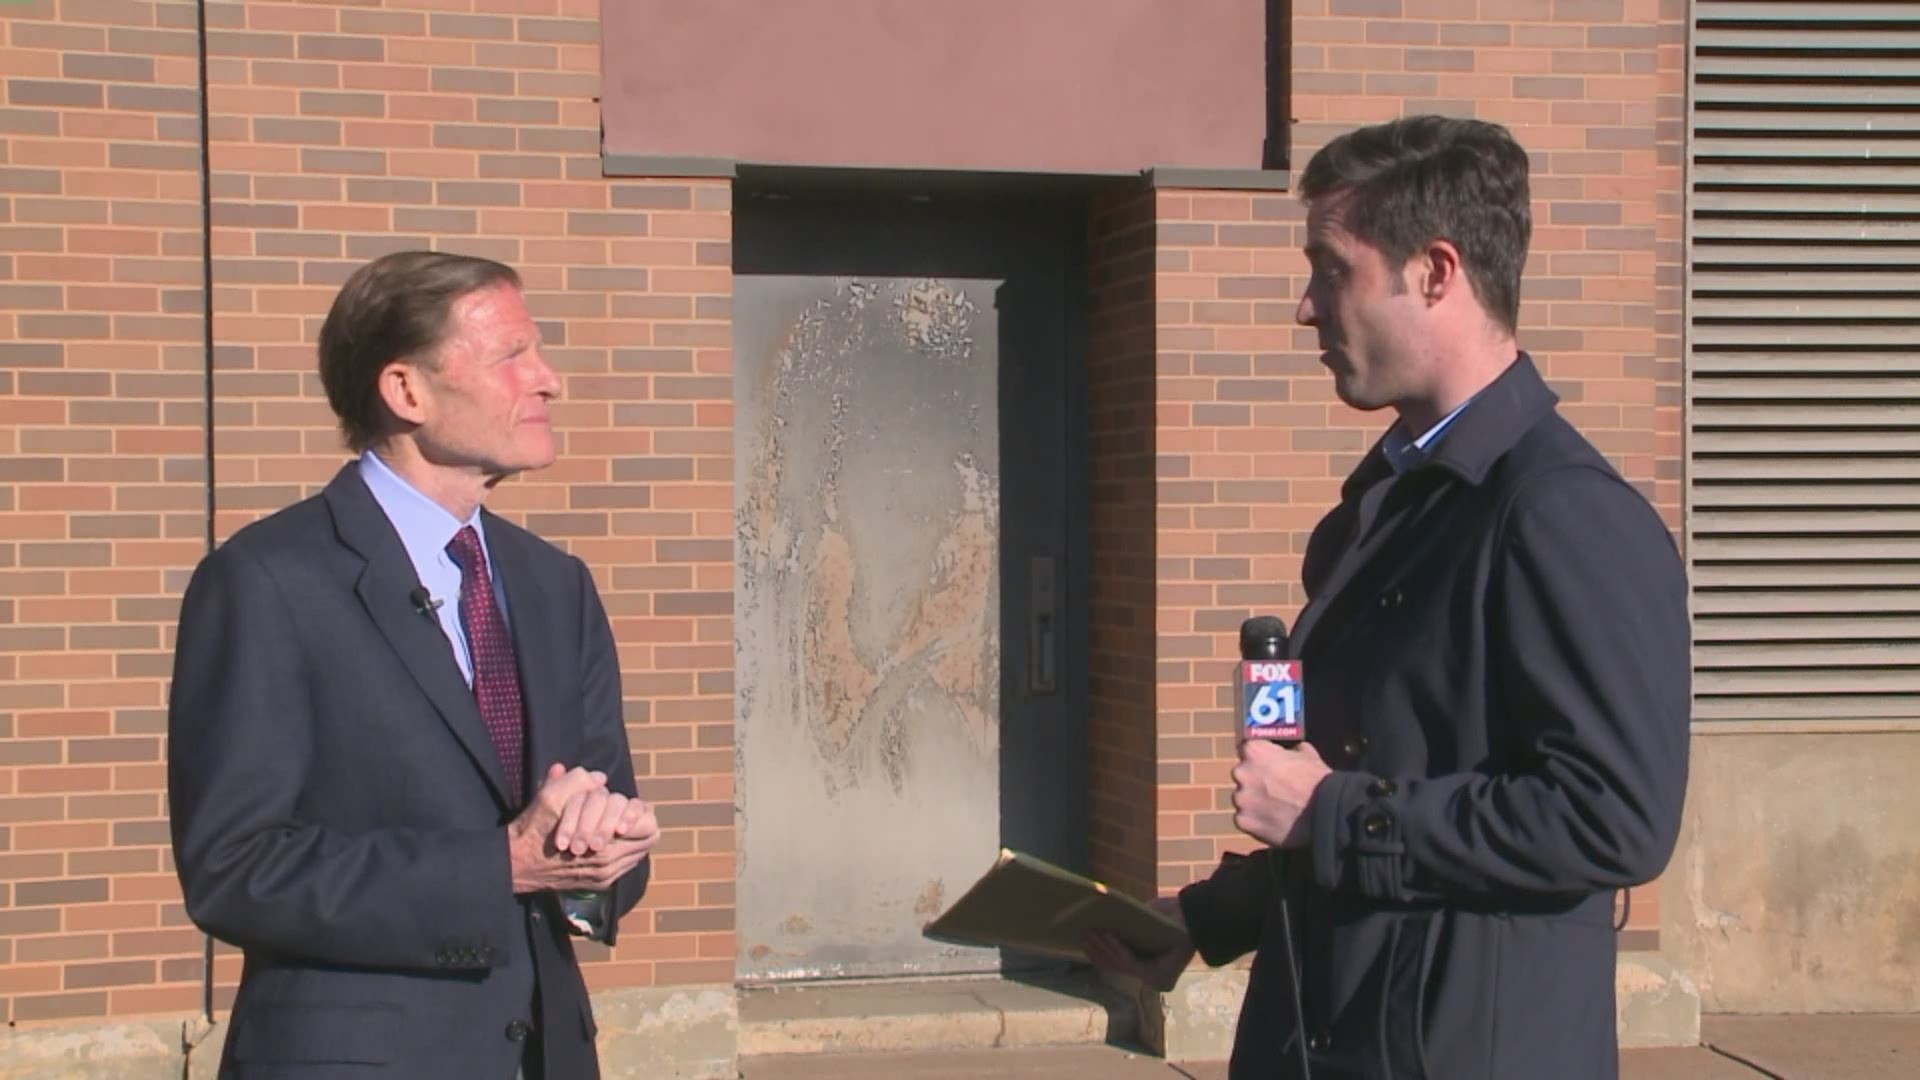 Sen. Blumenthal talks with FOX61's Keith McGilvery on the response to COVID-19